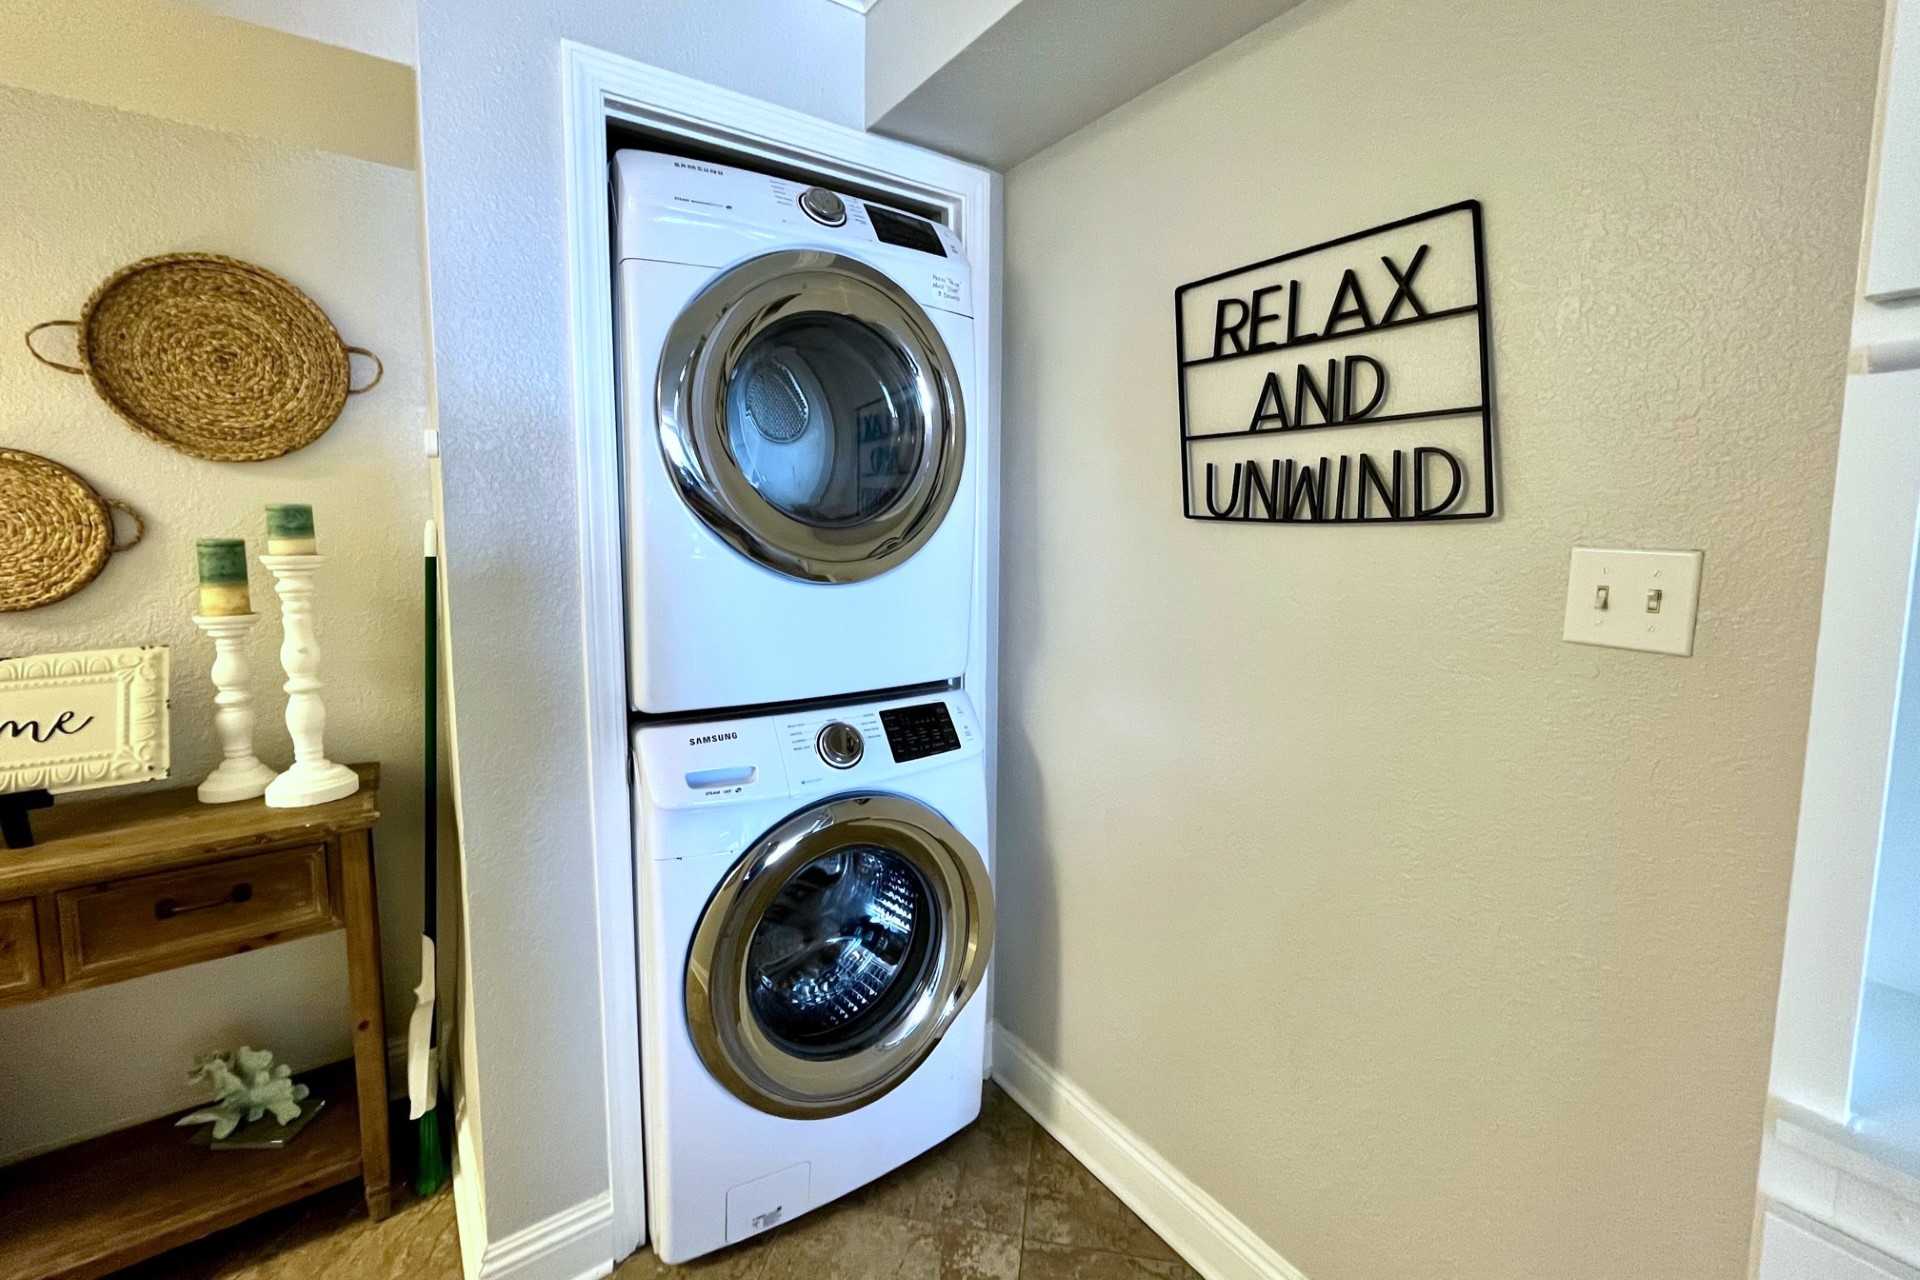 The unit supplies a washer/dryer to make keeping up with the